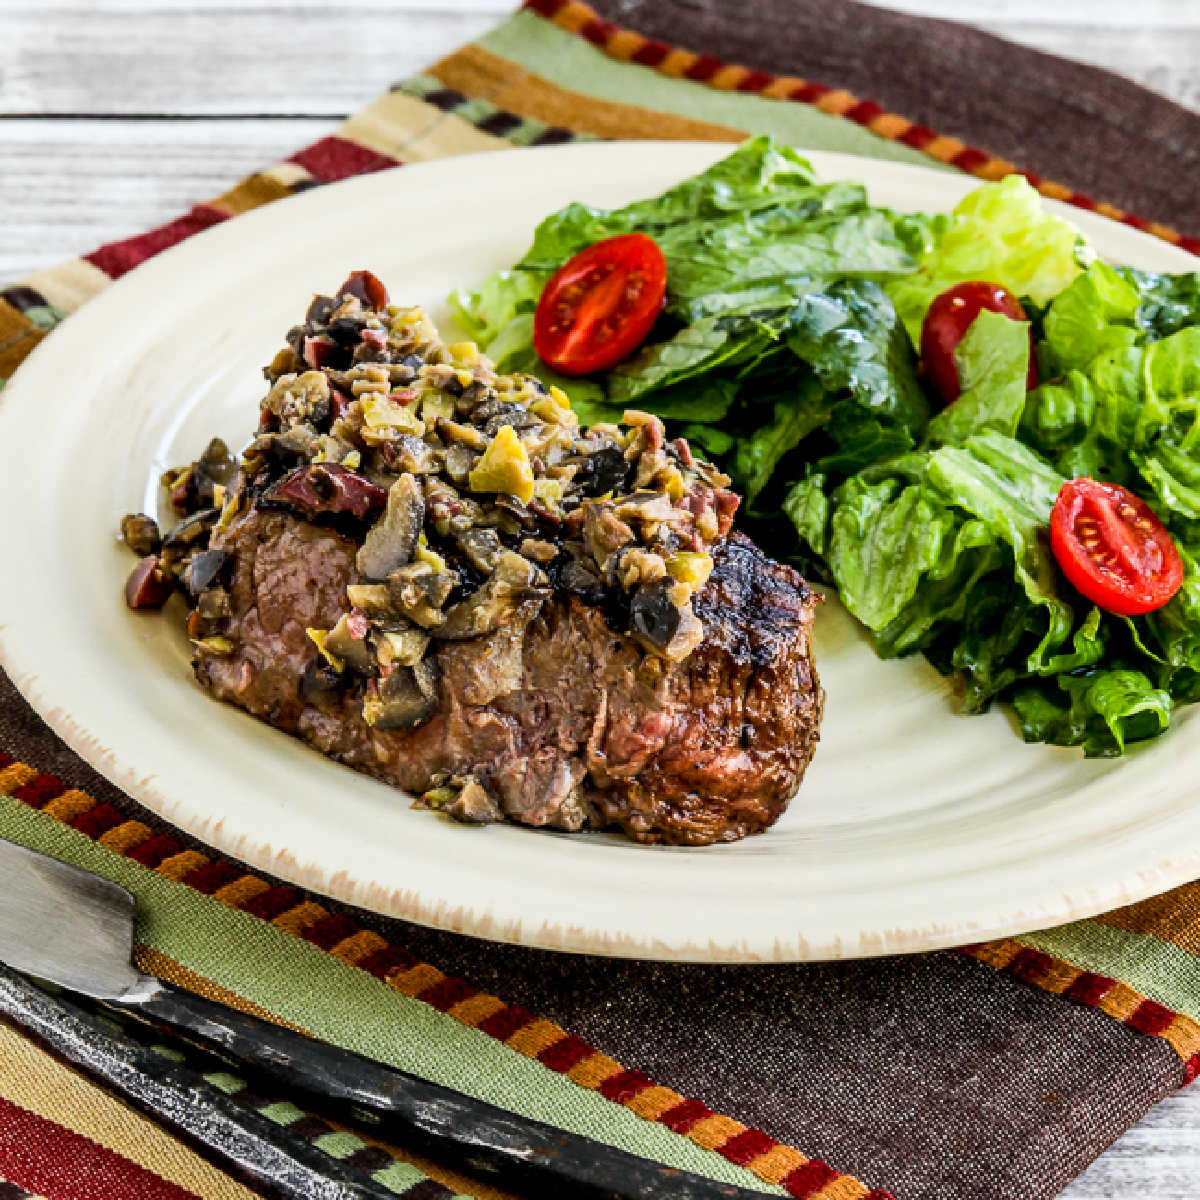 Square image for Pan-Grilled Steak with Olive Sauce shown on plate with lettuce and tomato salad.